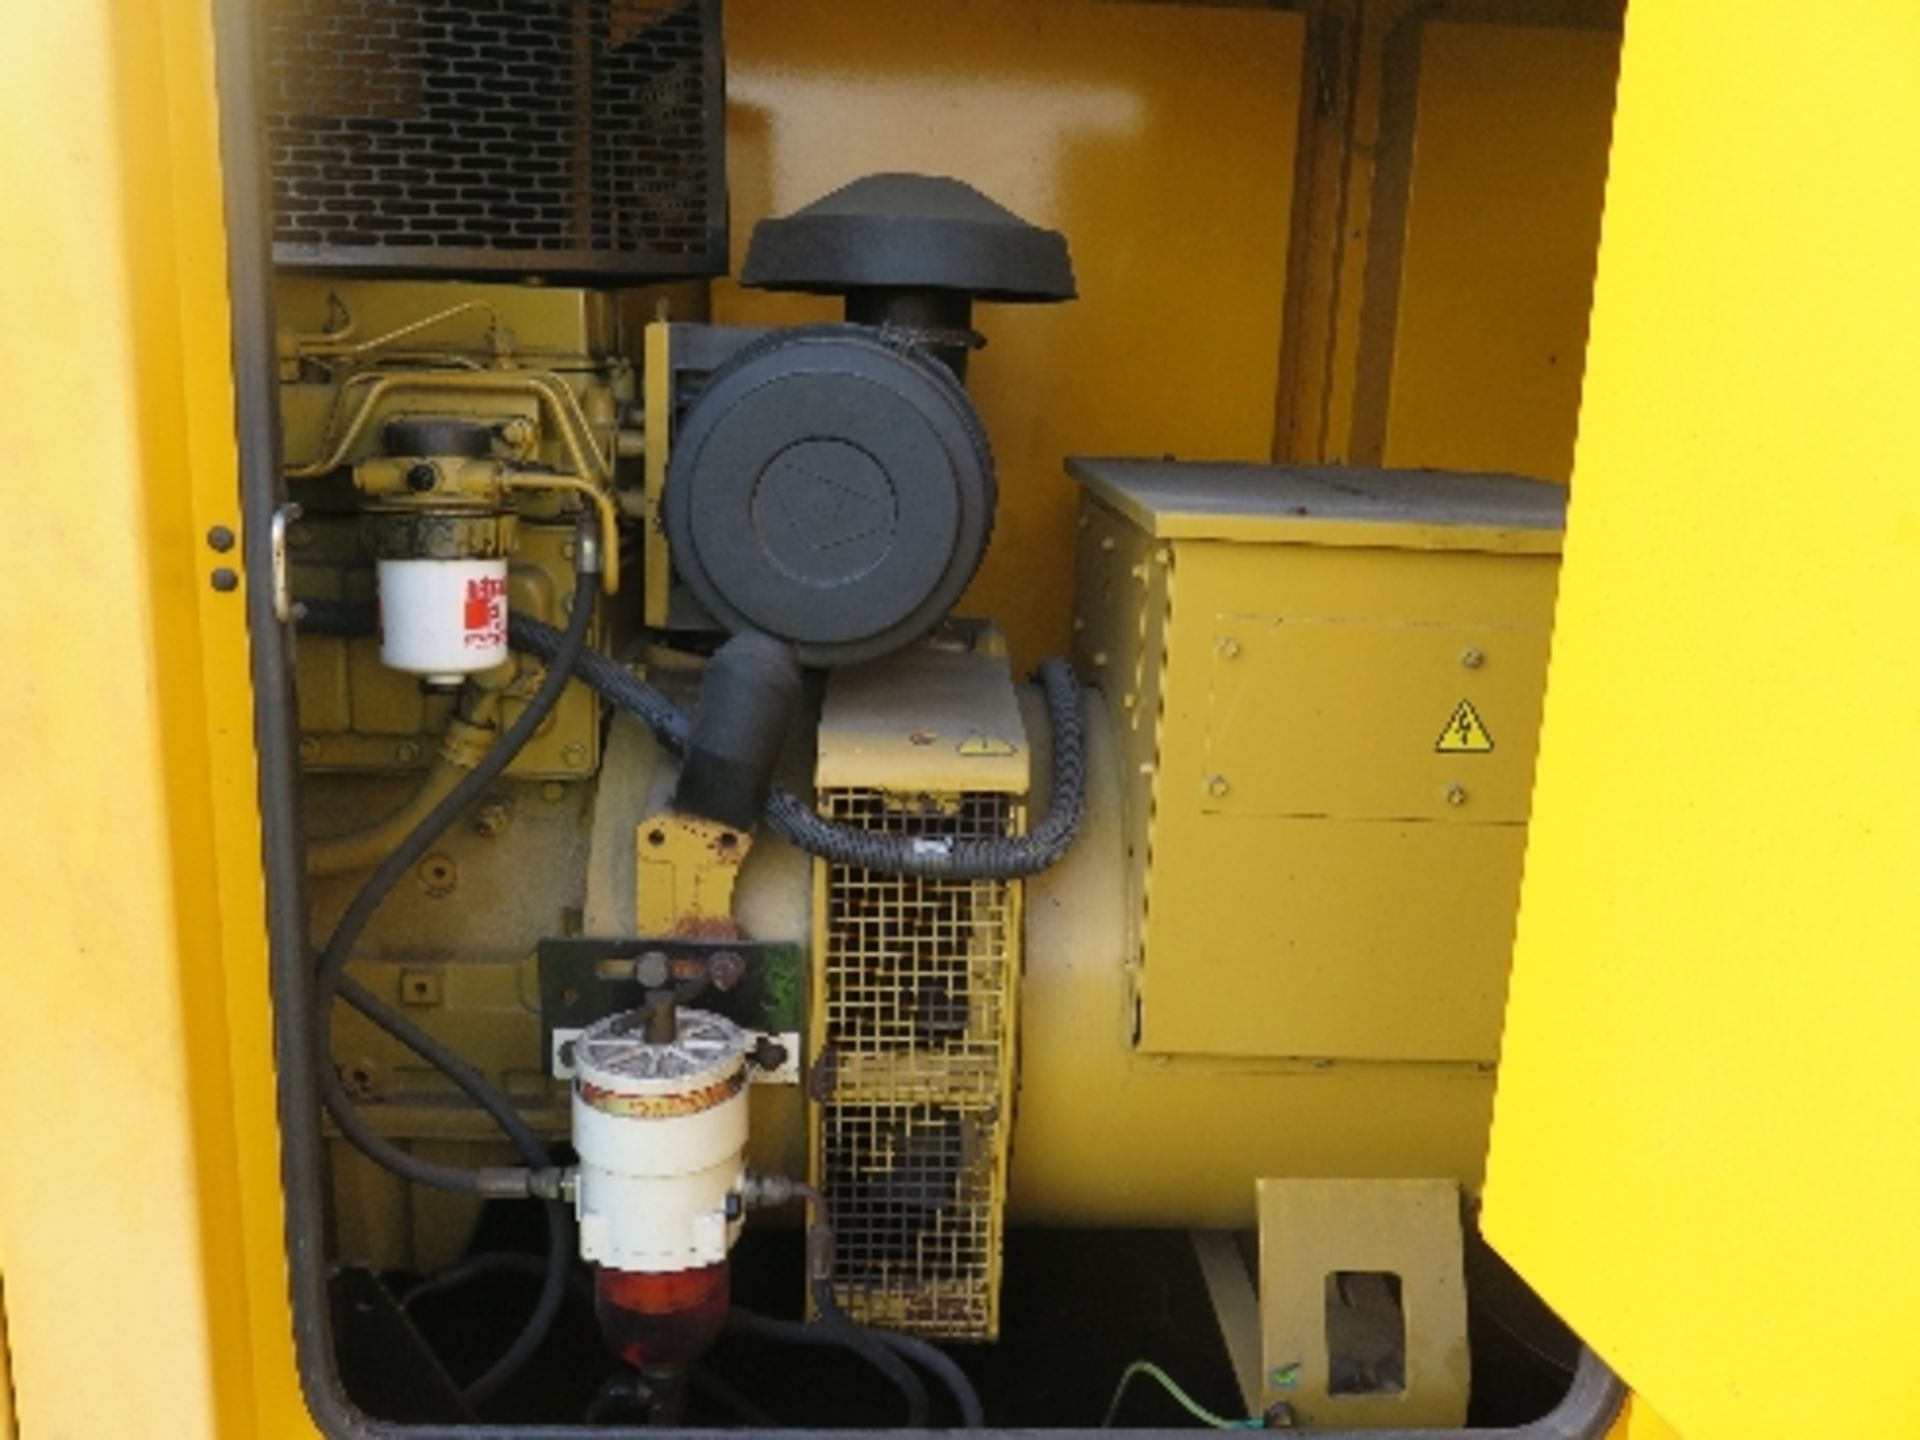 Caterpillar XQE100 trailer mounted generator 15455 hrs 145916
PERKINS - RUNS AND MAKES POWER
FAN - Image 4 of 8